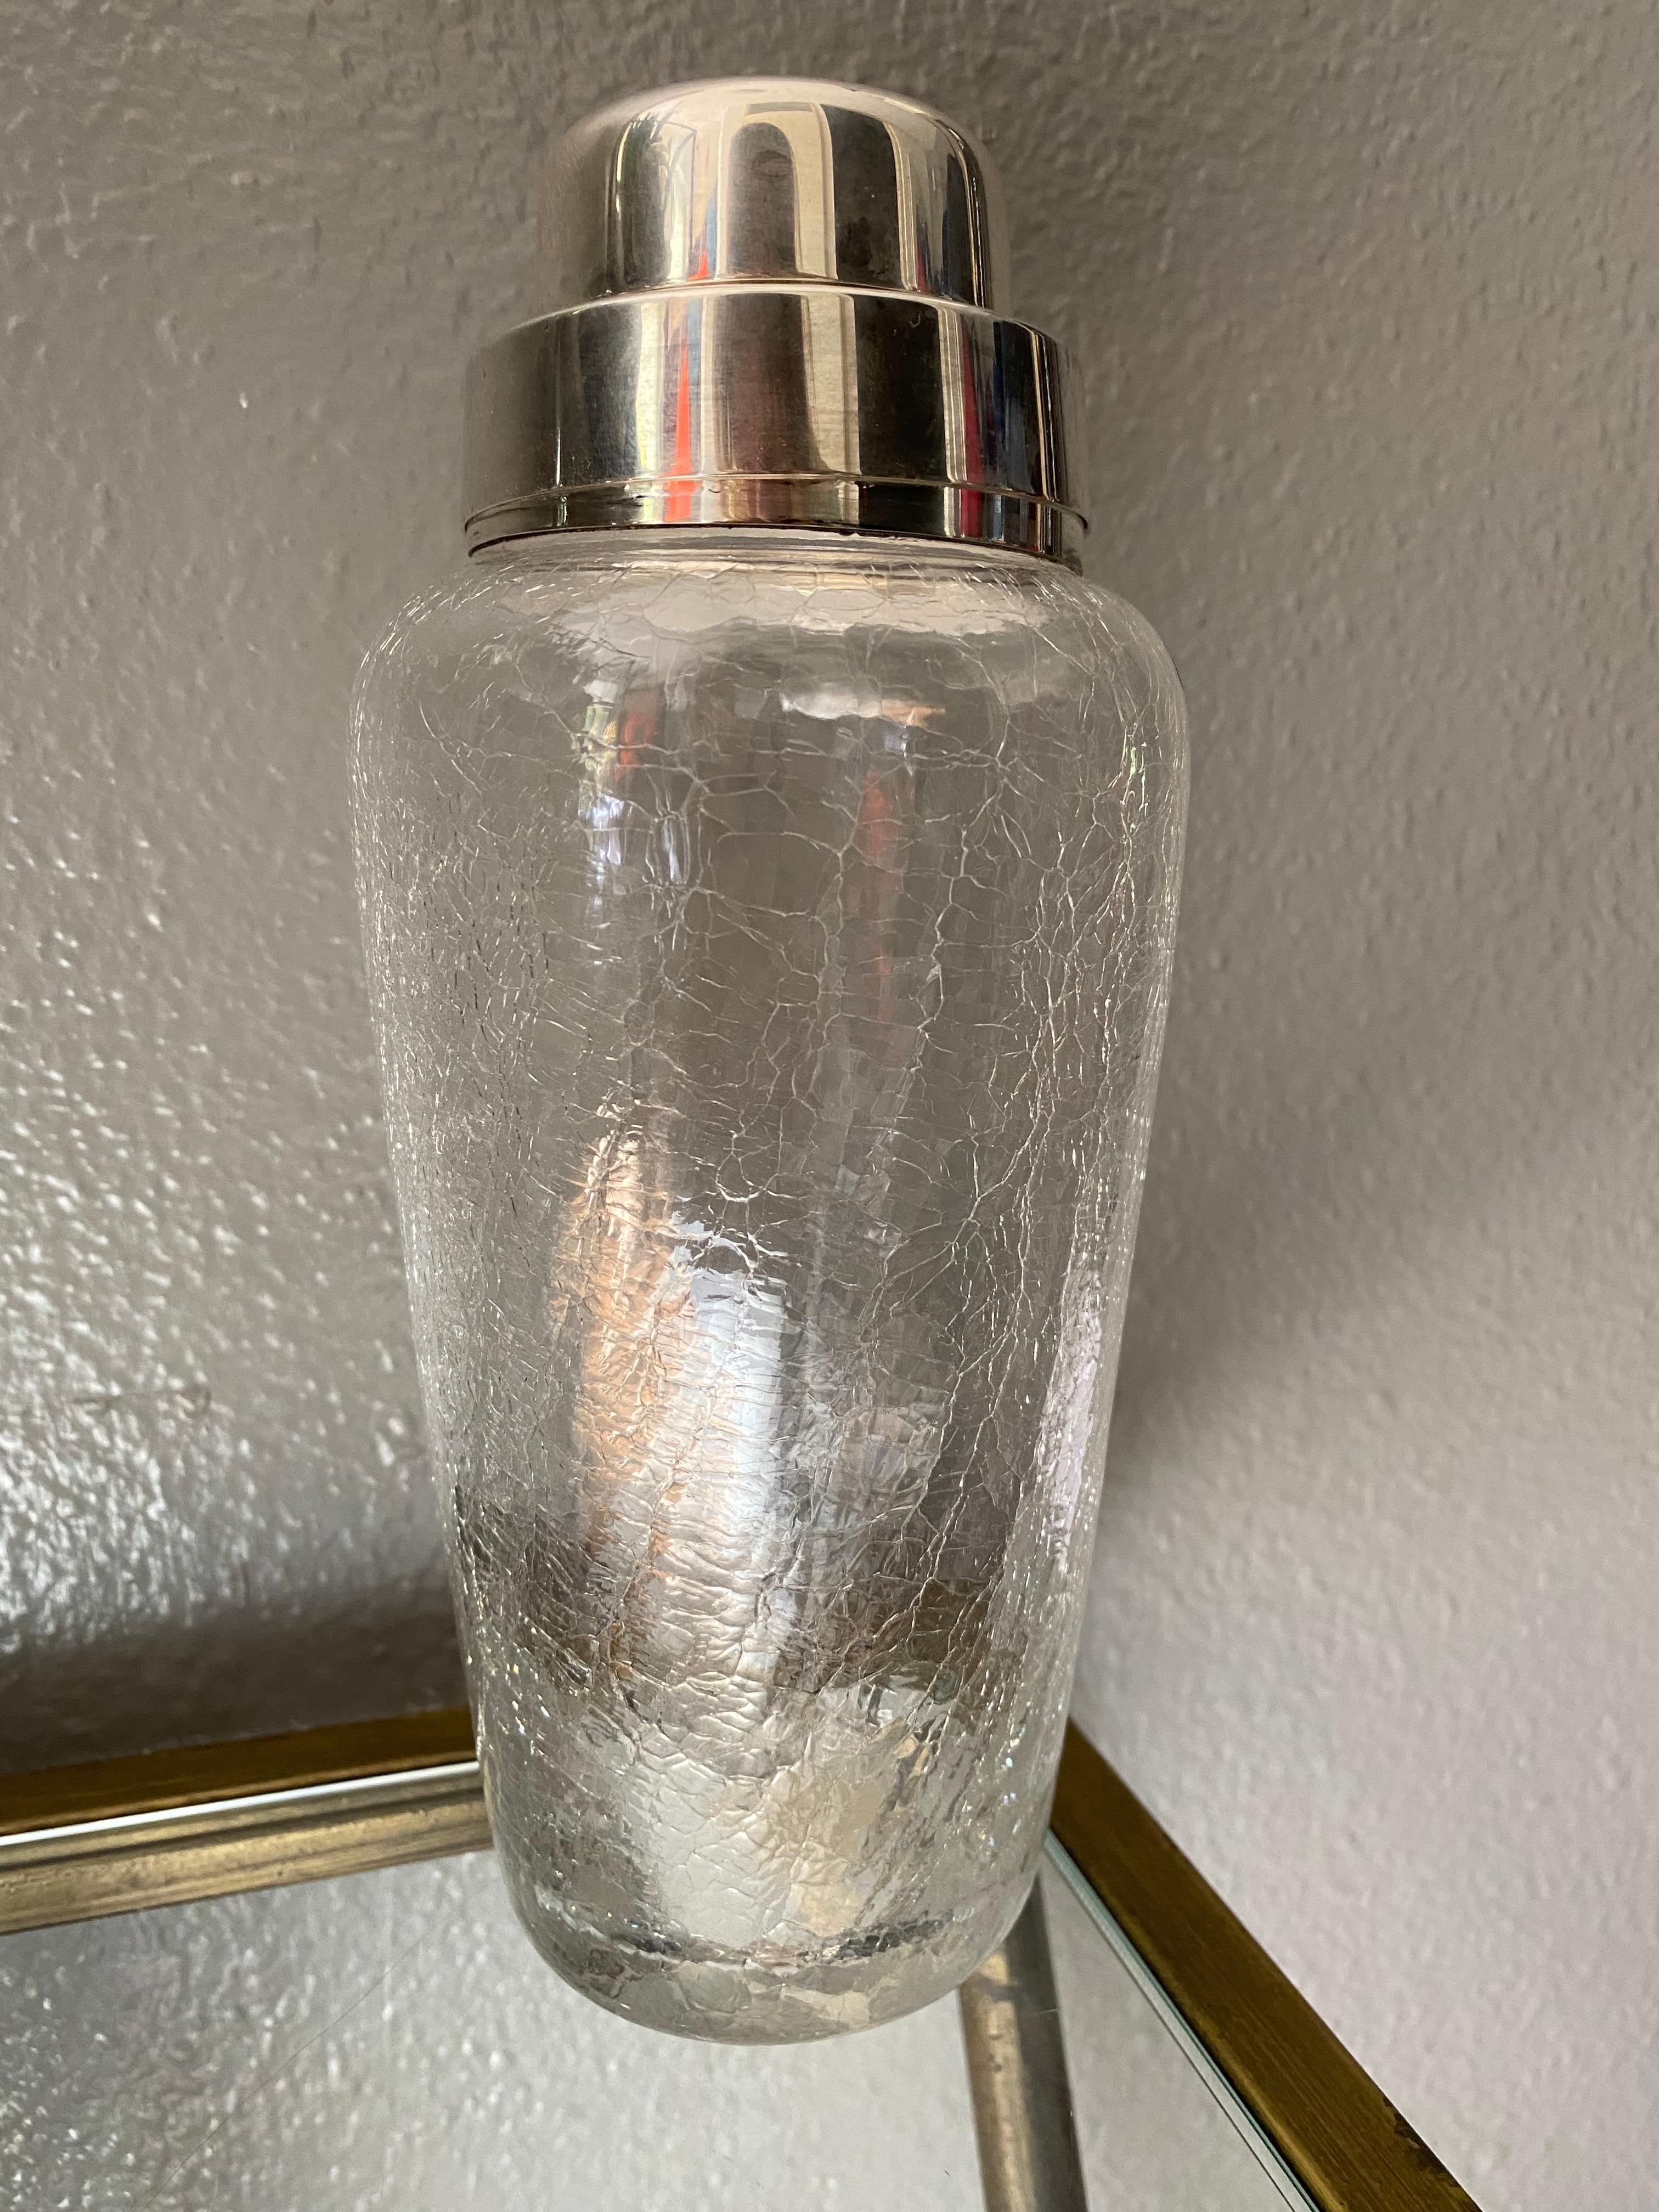 This chic bar accessory is made by the renowned manufacturer WMF. The shaker is in a very good condition. The shaker has a removable cap and strainer. It is marked underside the cap with legal silversmith hallmarks reading NS - WMF. NS stand for